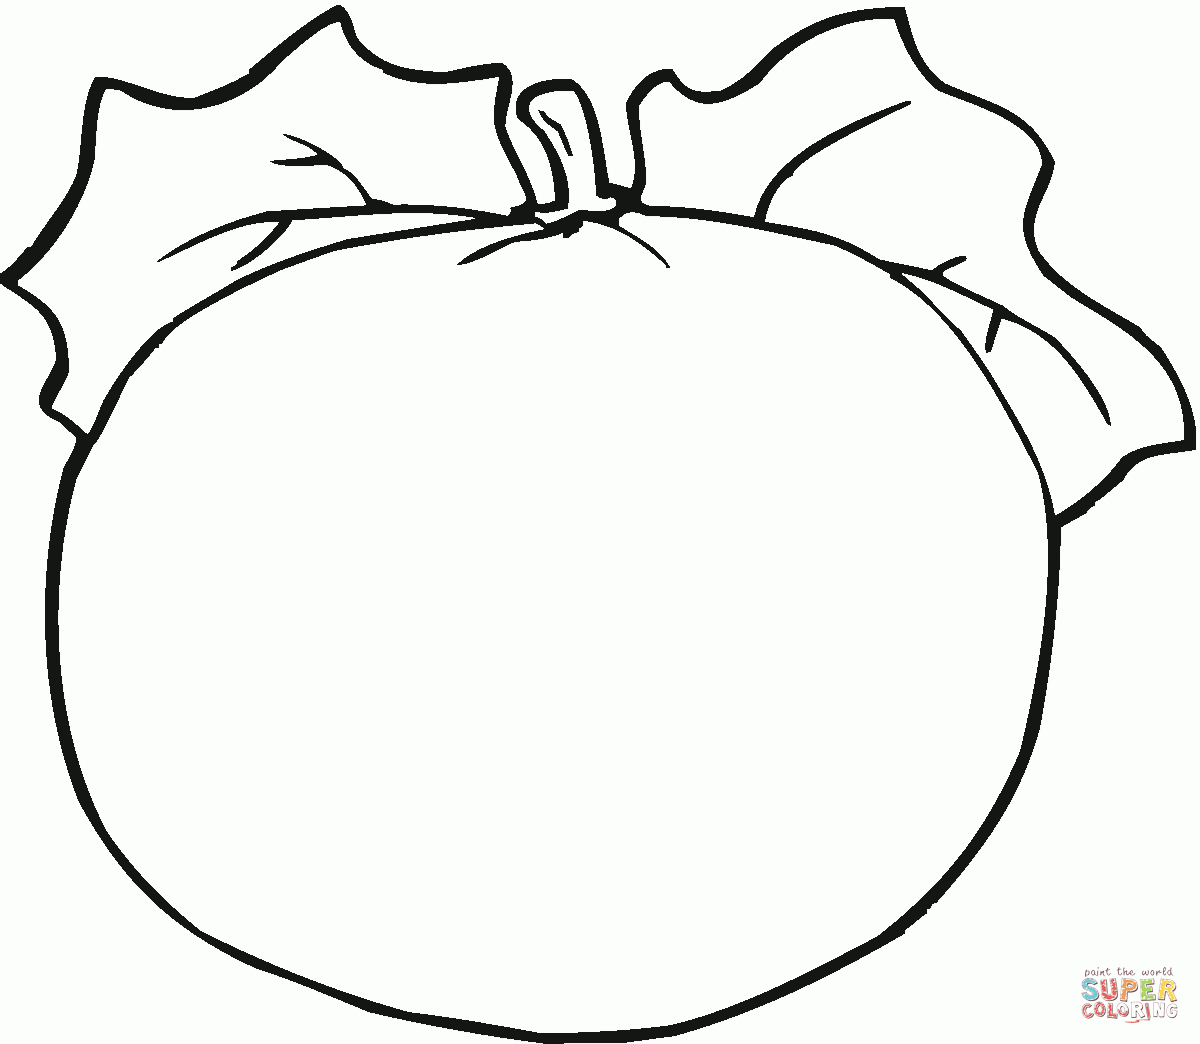 Pumpkins Coloring Pages | Free Coloring Pages - Pumpkin Shape Template Printable Free